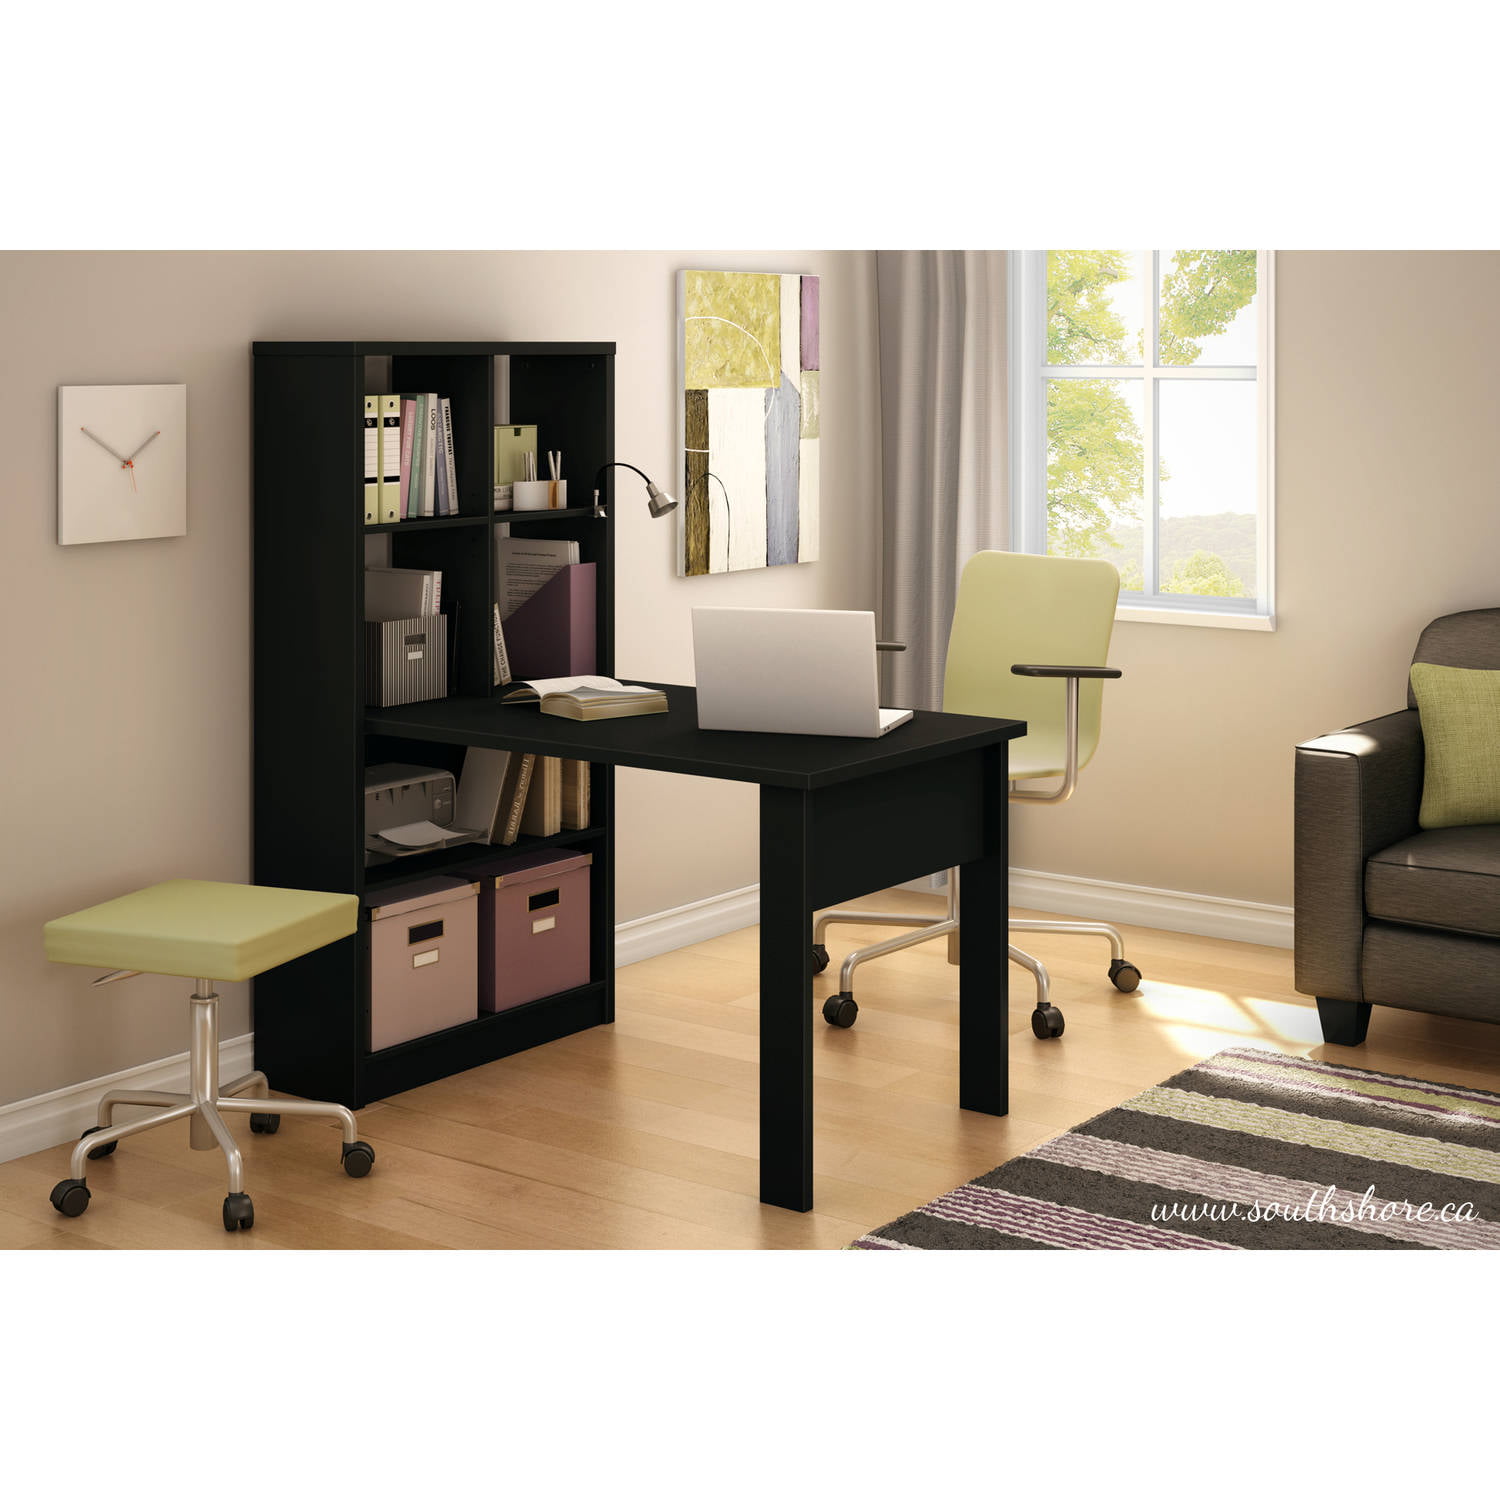 South Shore Annexe Craft Table And Storage Unit Combo Multiple